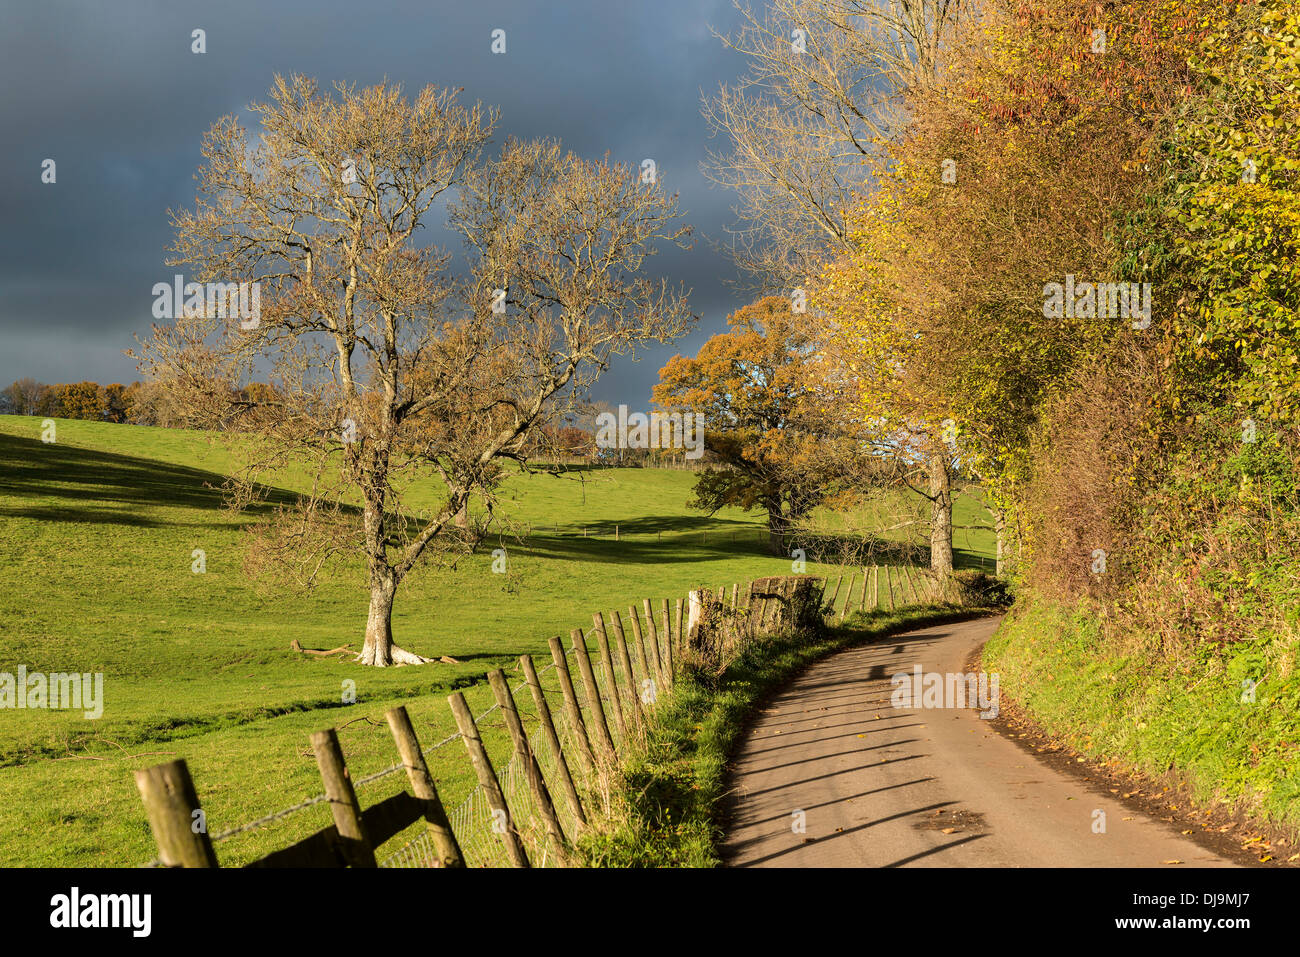 NARROW COUNTRY LANE IN AUTUMN WITH AUTUMN COLOUR AND DRAMATIC DARK SKY UK Stock Photo